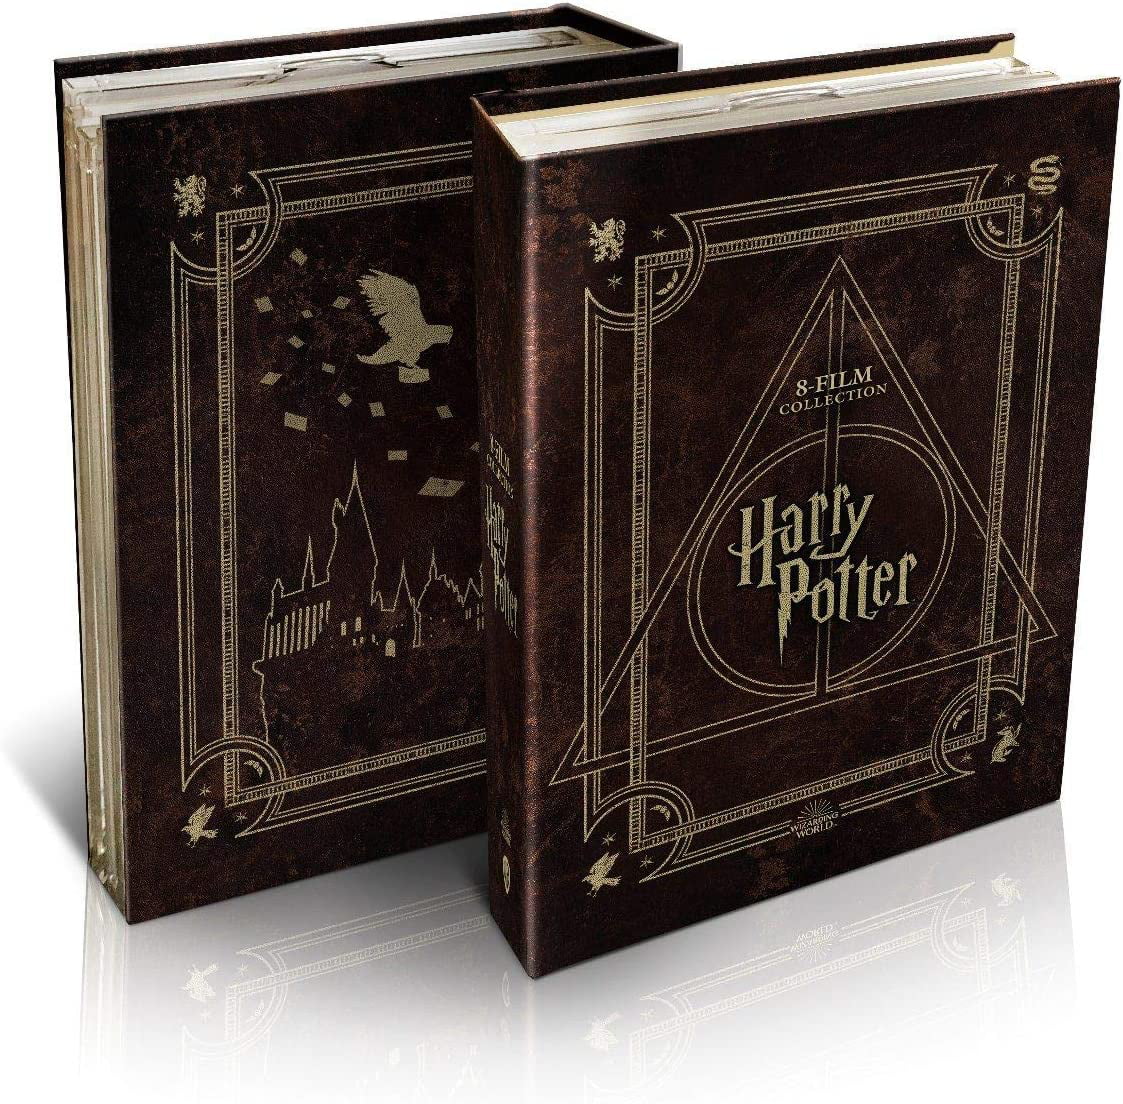 Harry Potter: Complete 8-Film Collection - Limited Edition 32 Page